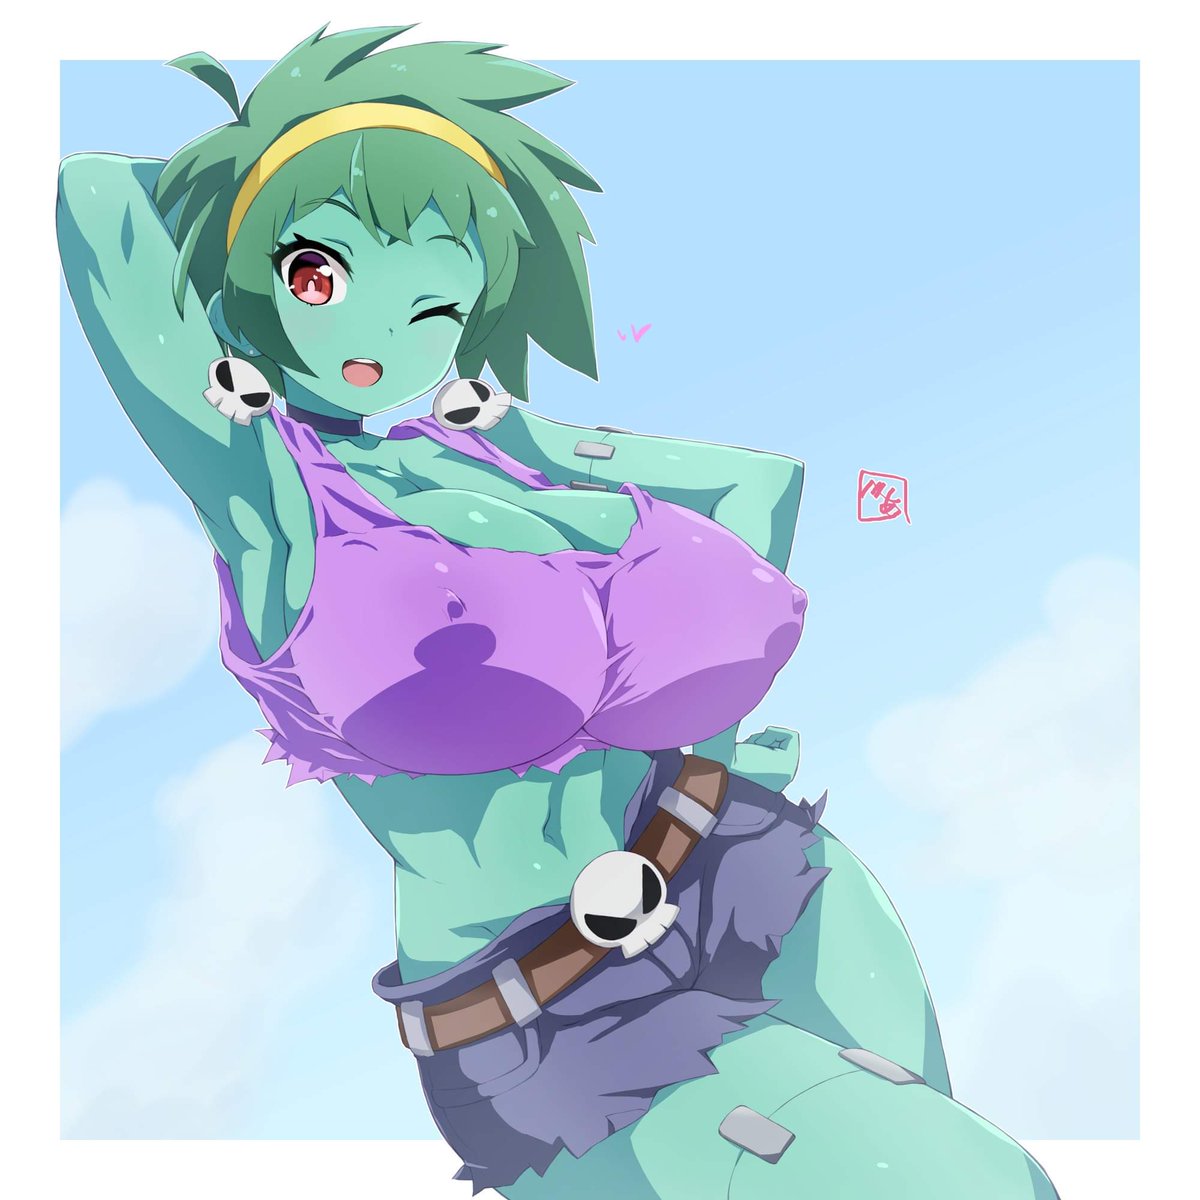 hi zombies! how are you?~

#Rottytops